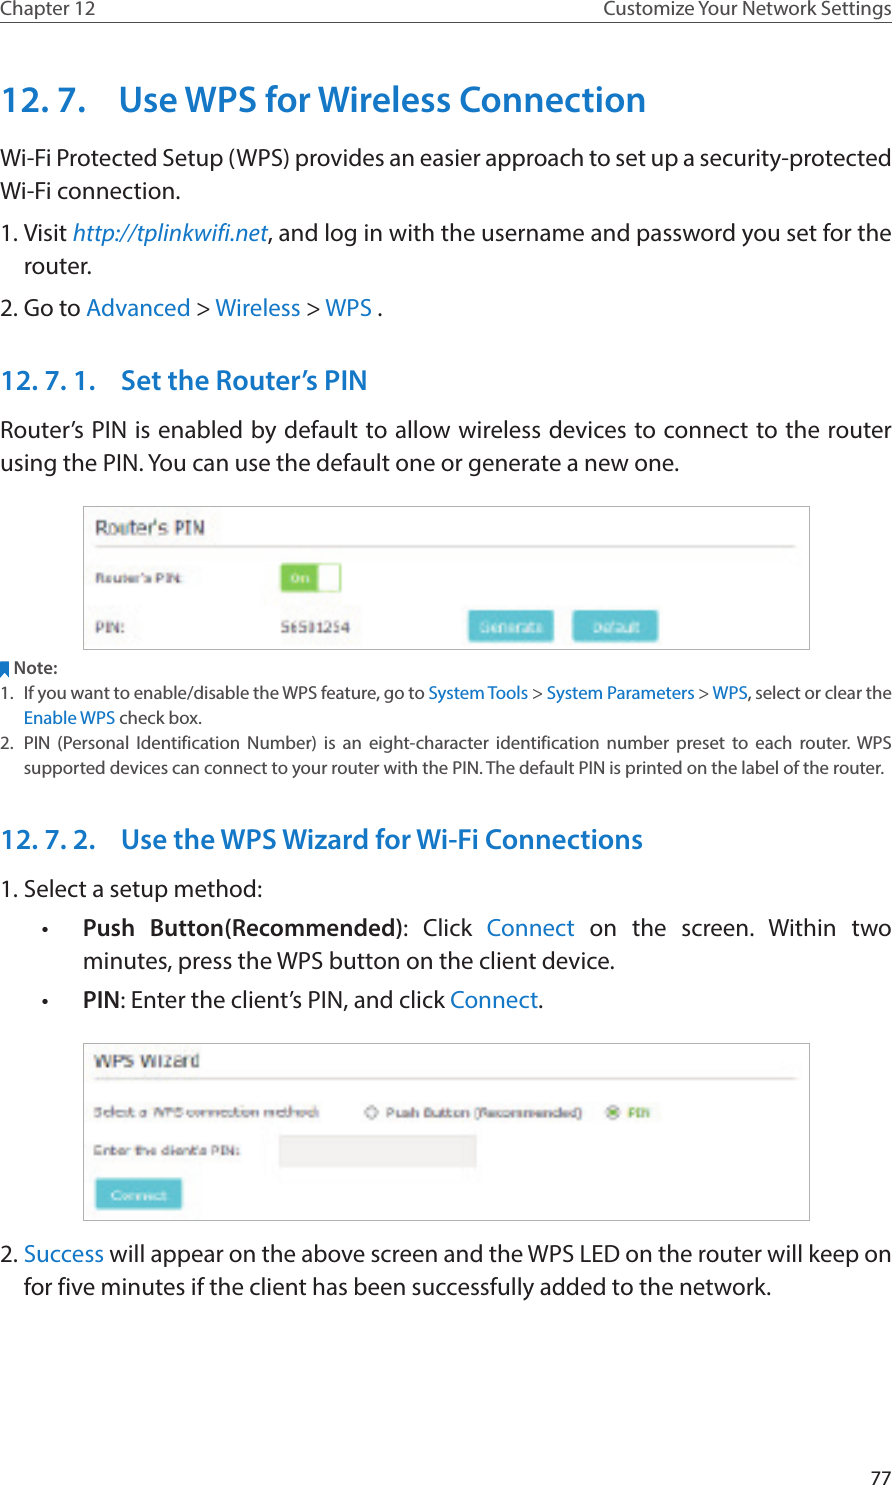 77Chapter 12 Customize Your Network Settings12. 7.  Use WPS for Wireless ConnectionWi-Fi Protected Setup (WPS) provides an easier approach to set up a security-protected Wi-Fi connection.1. Visit http://tplinkwifi.net, and log in with the username and password you set for the router.2. Go to Advanced &gt; Wireless &gt; WPS .12. 7. 1.  Set the Router’s PINRouter’s PIN is enabled by default to allow wireless devices to connect to the router using the PIN. You can use the default one or generate a new one.Note:1.  If you want to enable/disable the WPS feature, go to System Tools &gt; System Parameters &gt; WPS, select or clear the Enable WPS check box.2.  PIN (Personal Identification Number) is an eight-character identification number preset to each router. WPS supported devices can connect to your router with the PIN. The default PIN is printed on the label of the router.12. 7. 2.  Use the WPS Wizard for Wi-Fi Connections1. Select a setup method: •  Push Button(Recommended): Click Connect on the screen. Within two minutes, press the WPS button on the client device.•  PIN: Enter the client’s PIN, and click Connect.2. Success will appear on the above screen and the WPS LED on the router will keep on for five minutes if the client has been successfully added to the network.